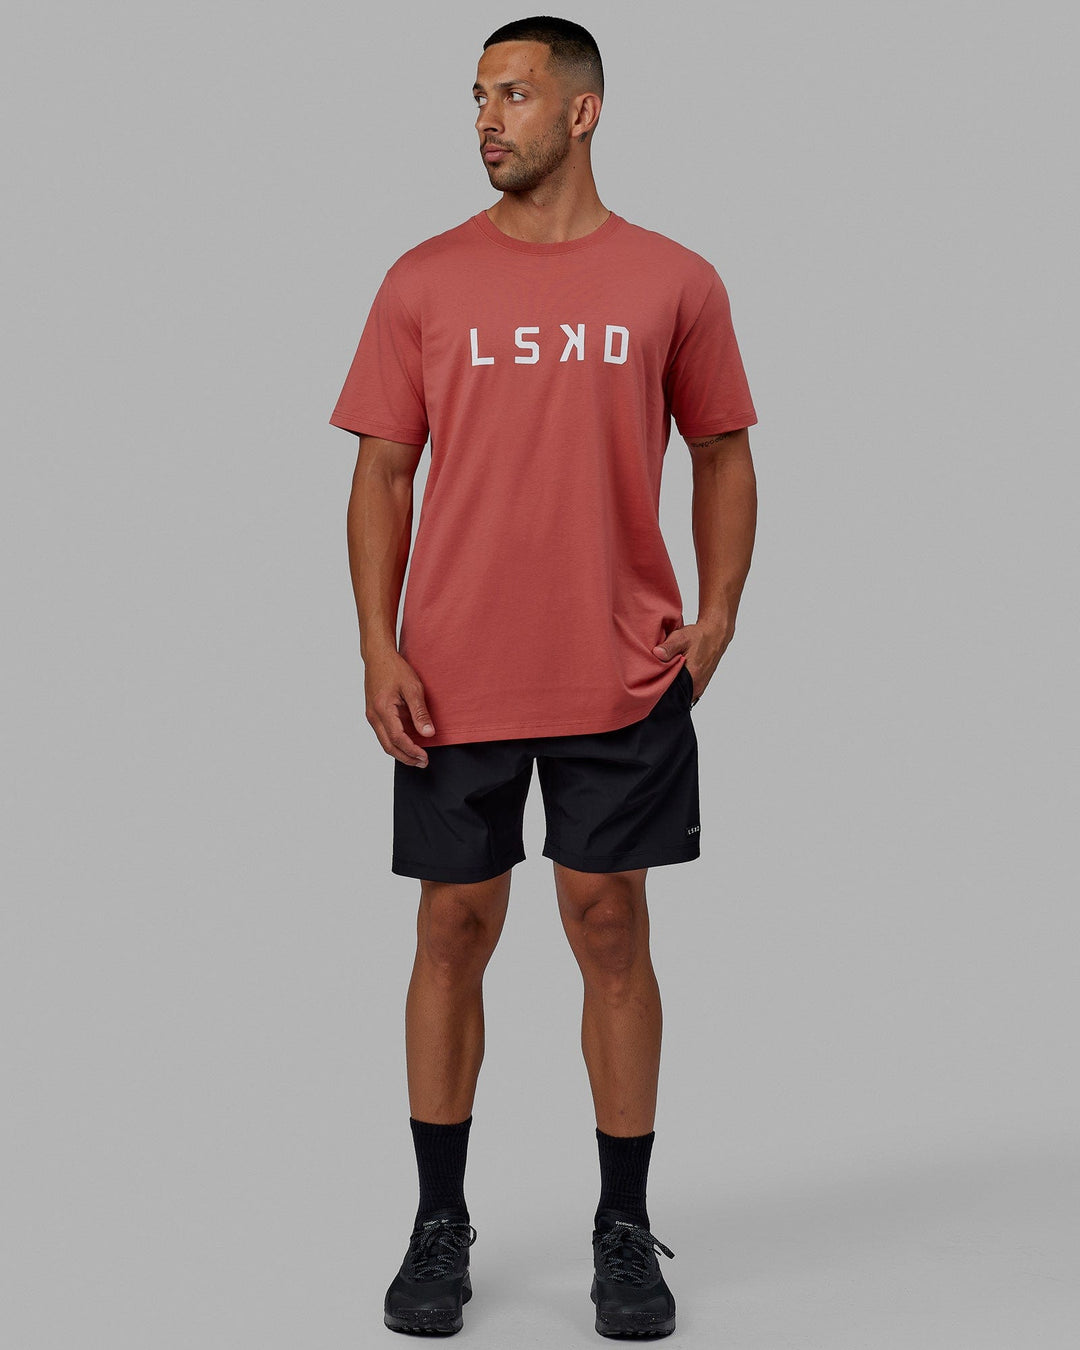 Structure Tee - Mineral Red-White